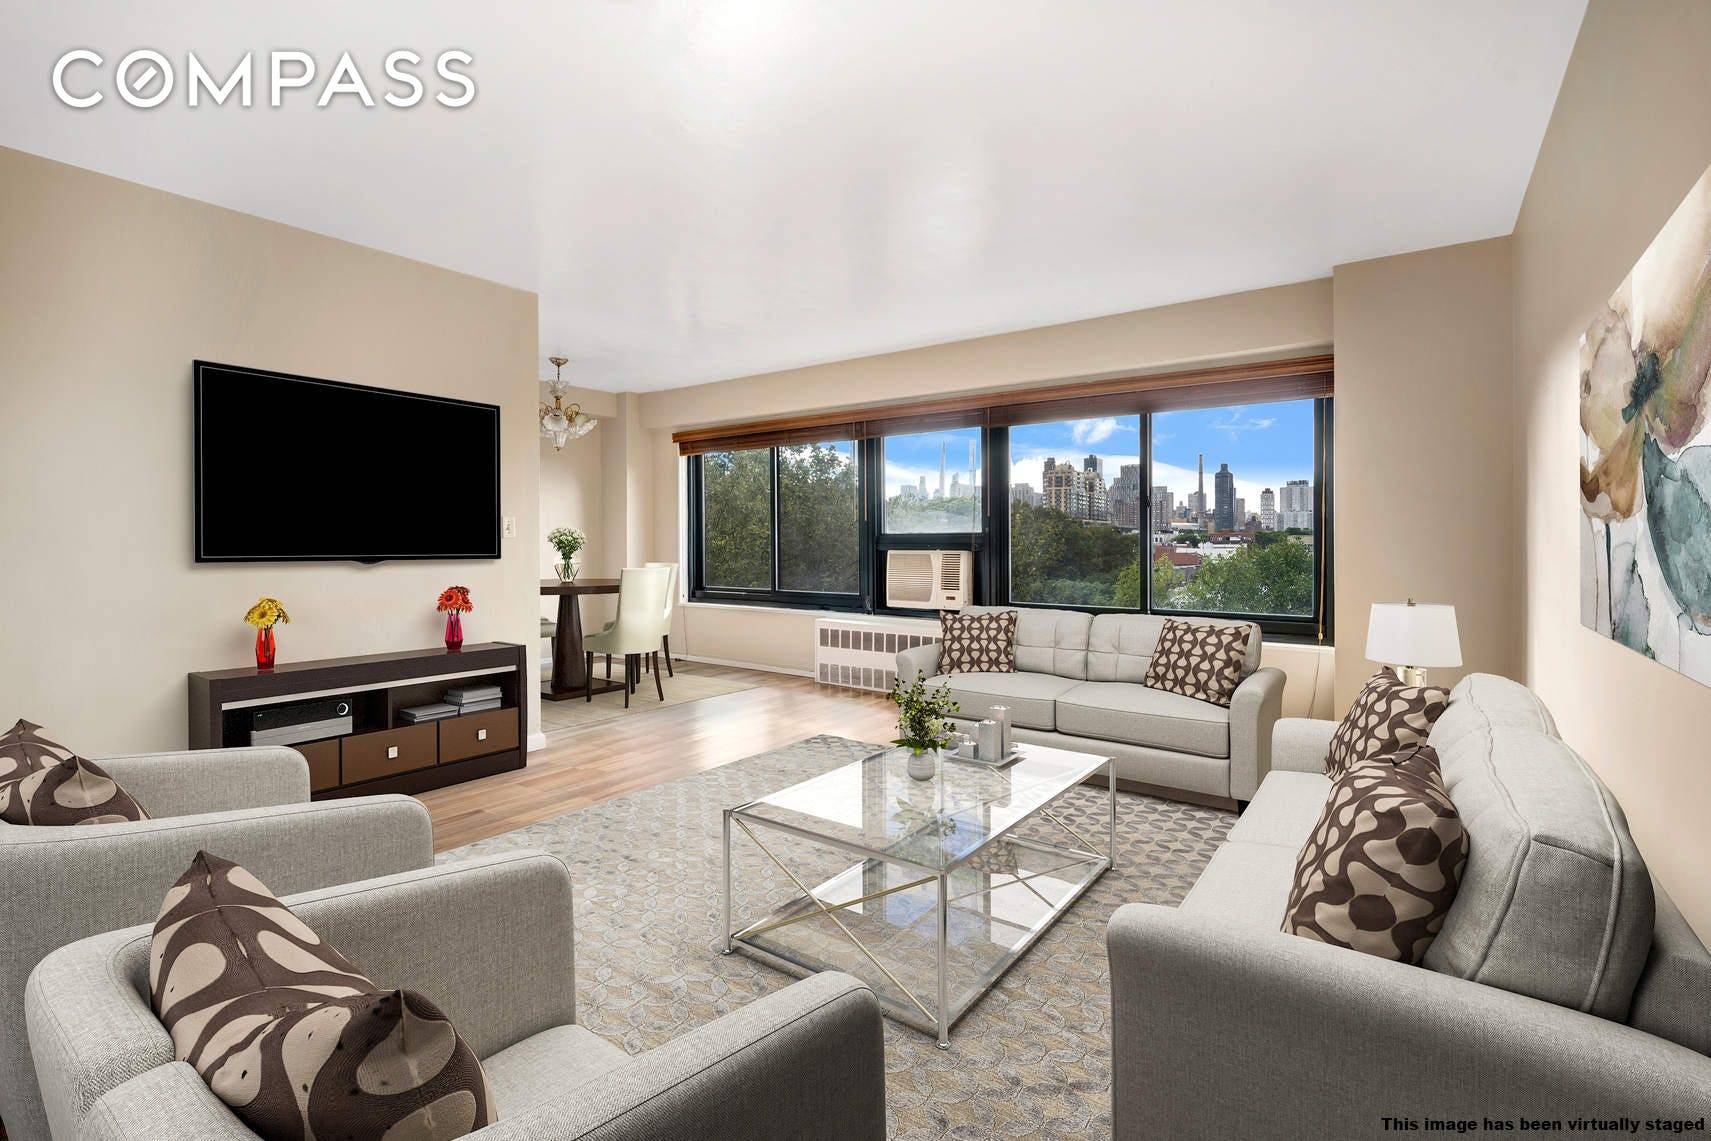 Gorgeous Manhattan skyline views welcome you when you enter this two bedroom co op.